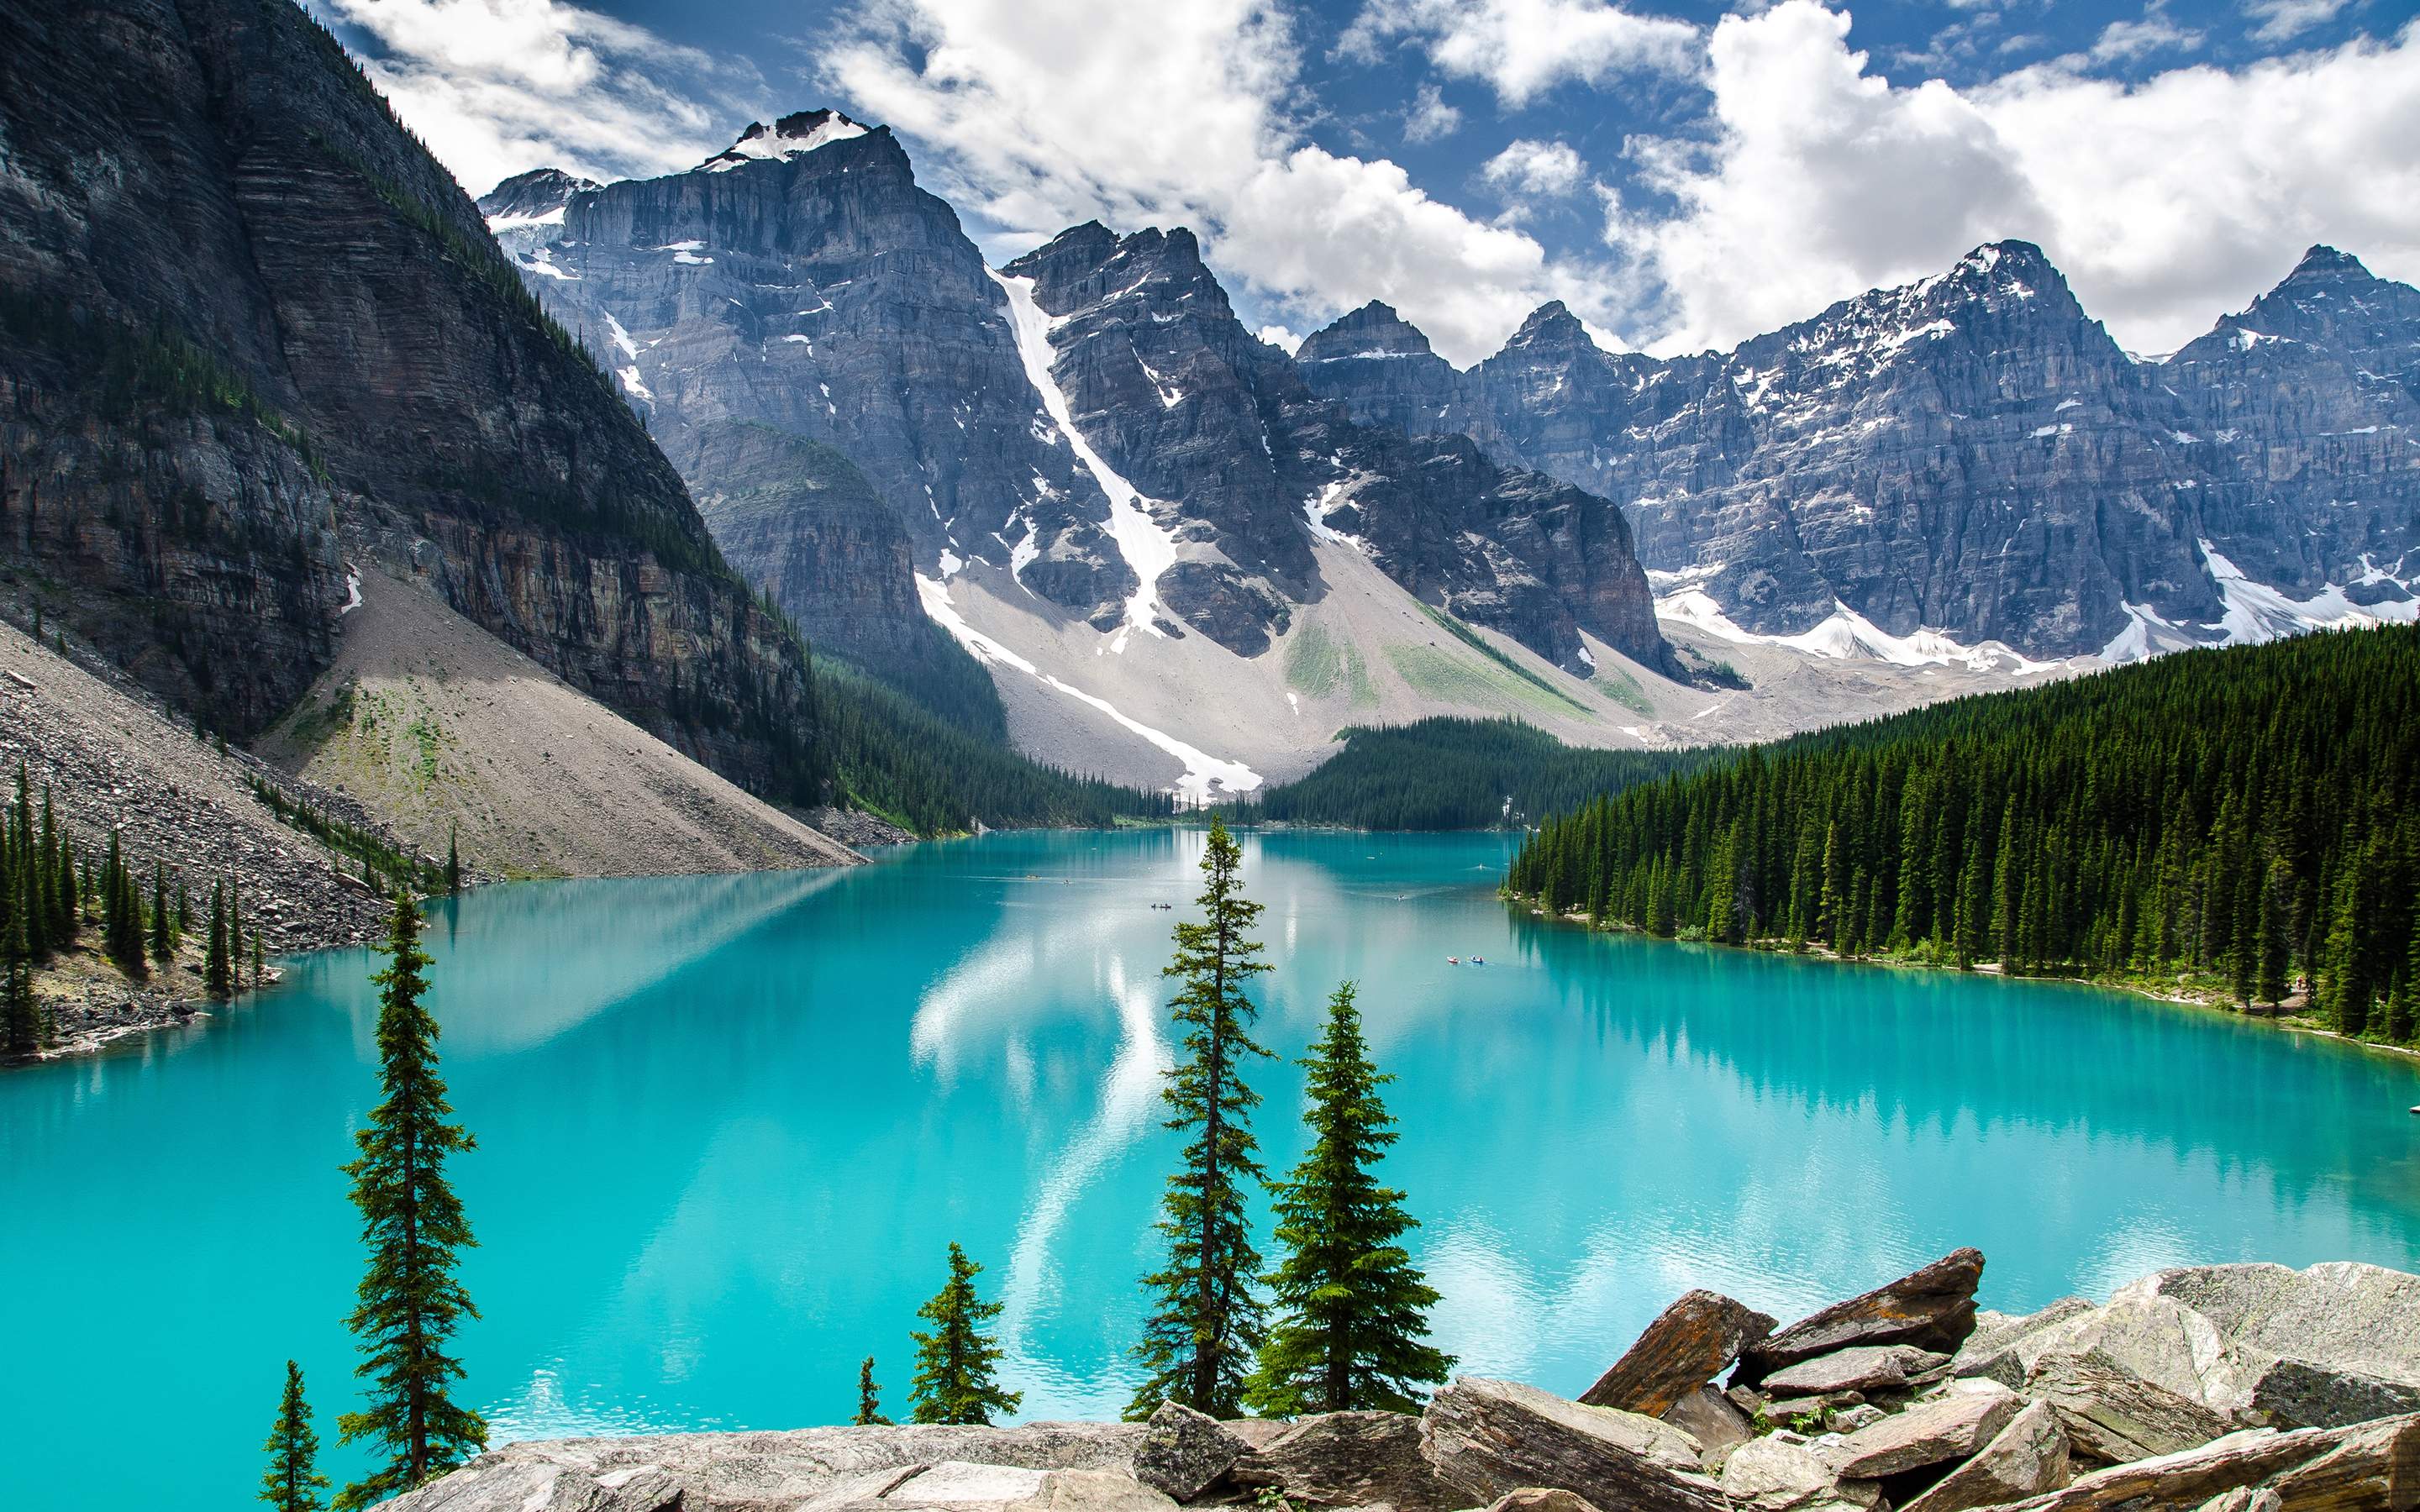 moraine lake, landscape, banff national park, tree, earth, lake, cloud, forest, mountain, scenic, sky, lakes lock screen backgrounds